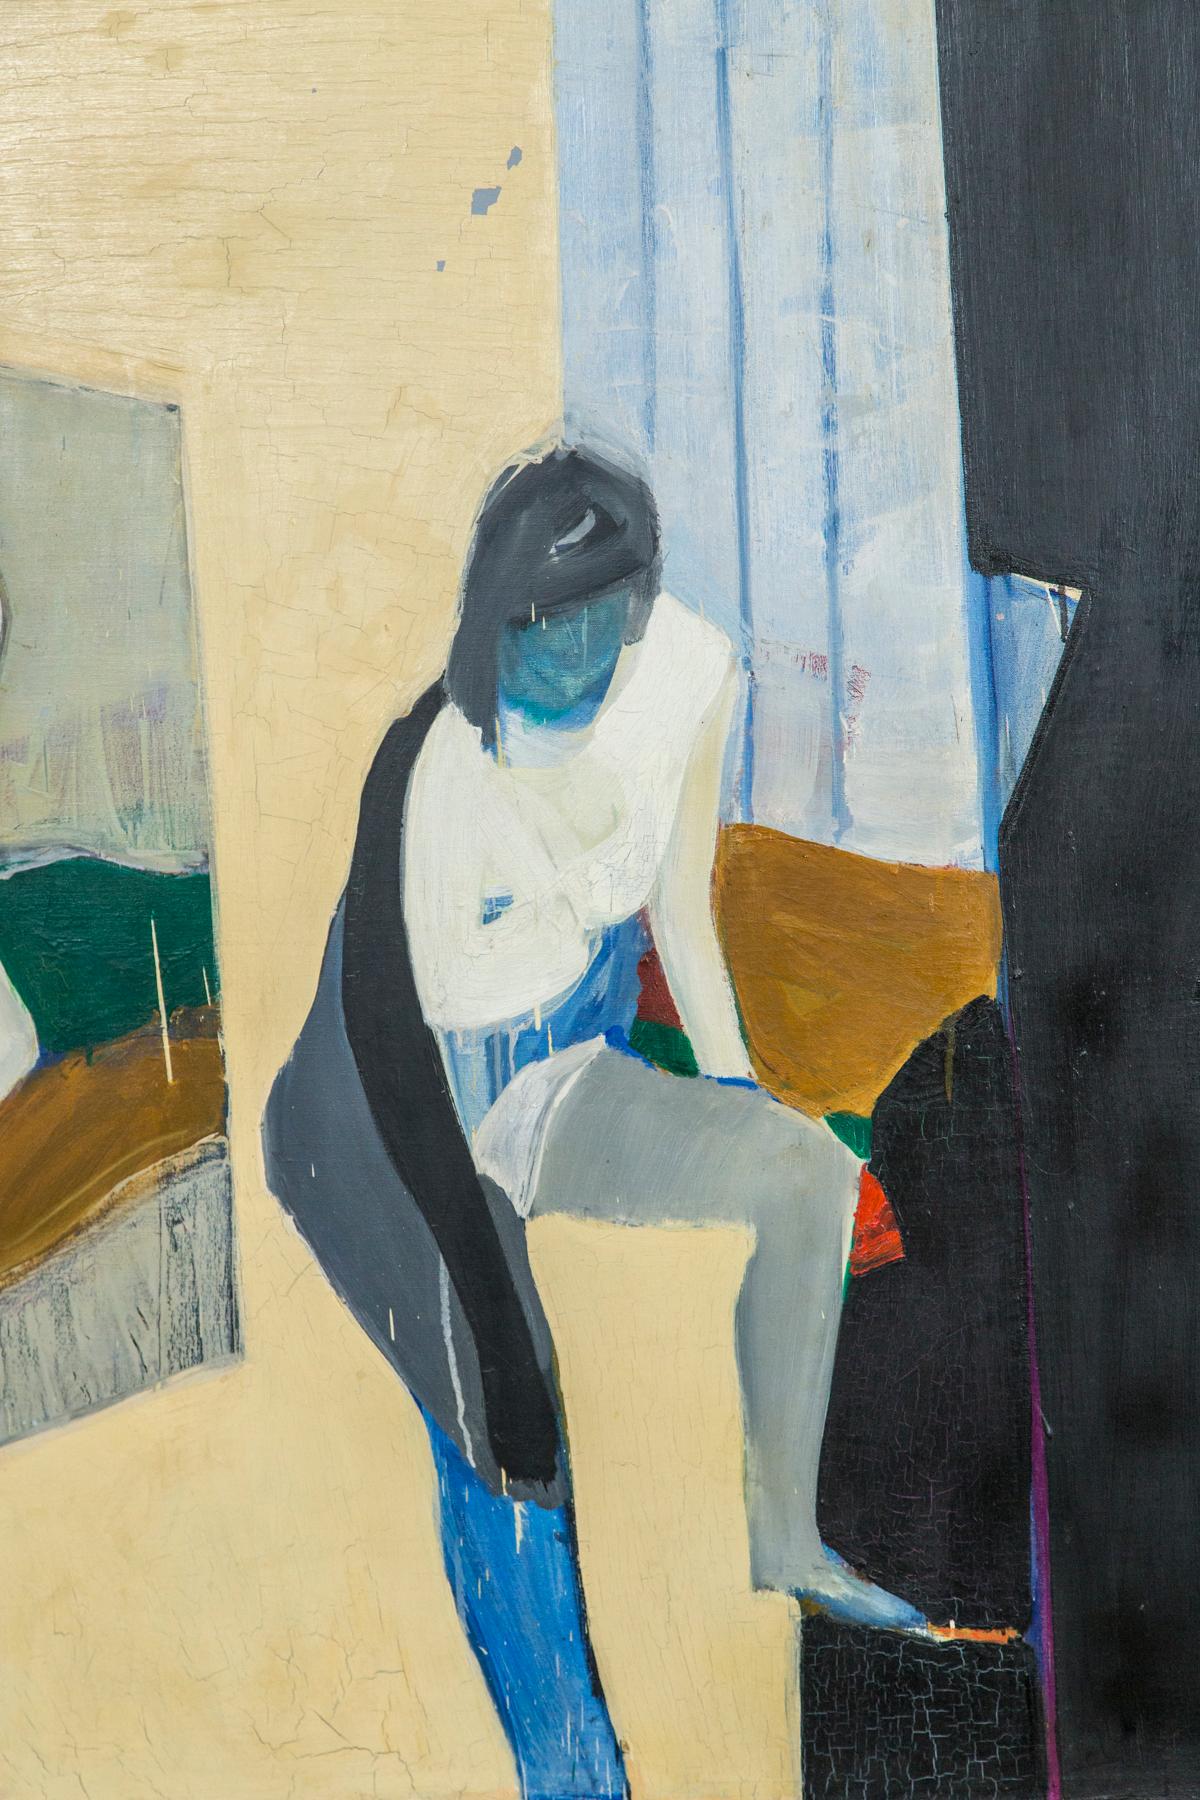 Tadashi Asoma painting of a woman, 1960s
Oil on canvas.